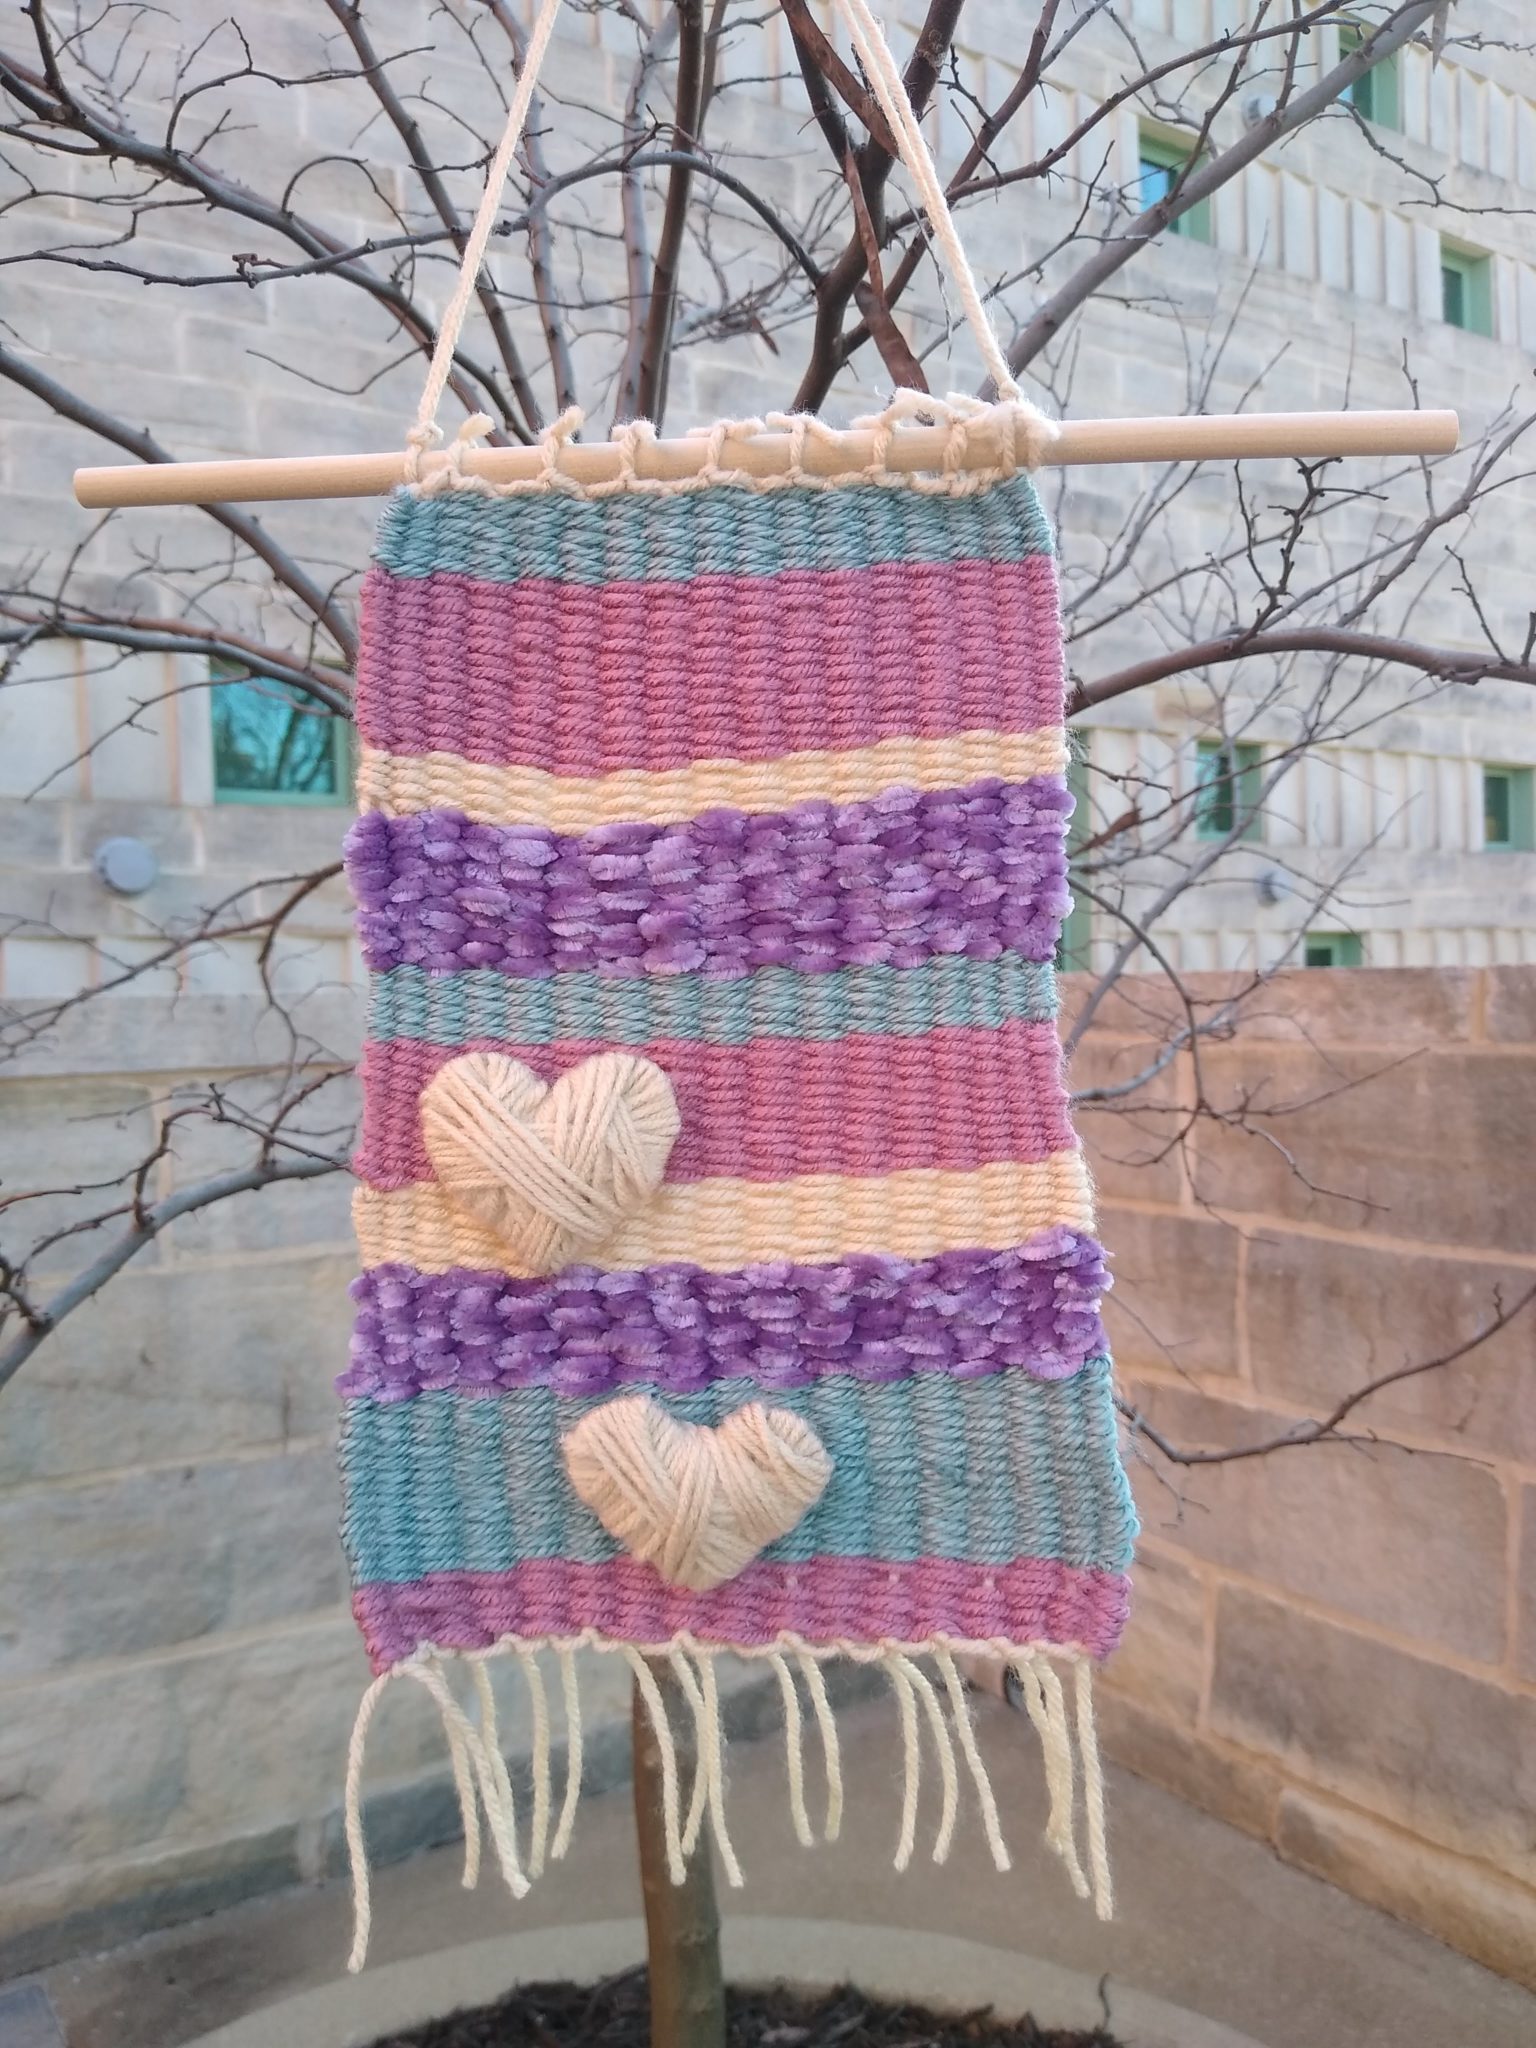 Simple Heart Weaving Wall Hanging - A Wonderful Thought